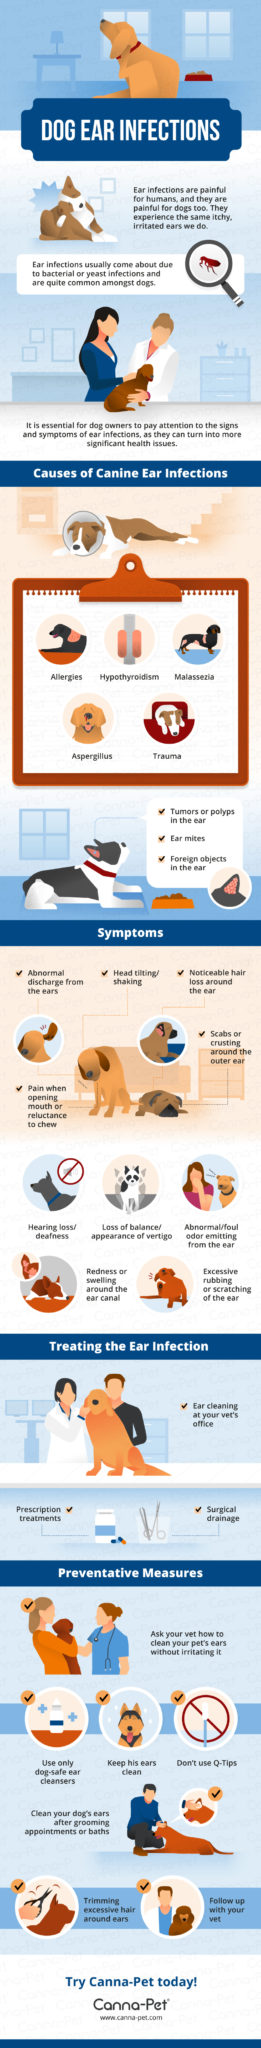 ear infection in dogs